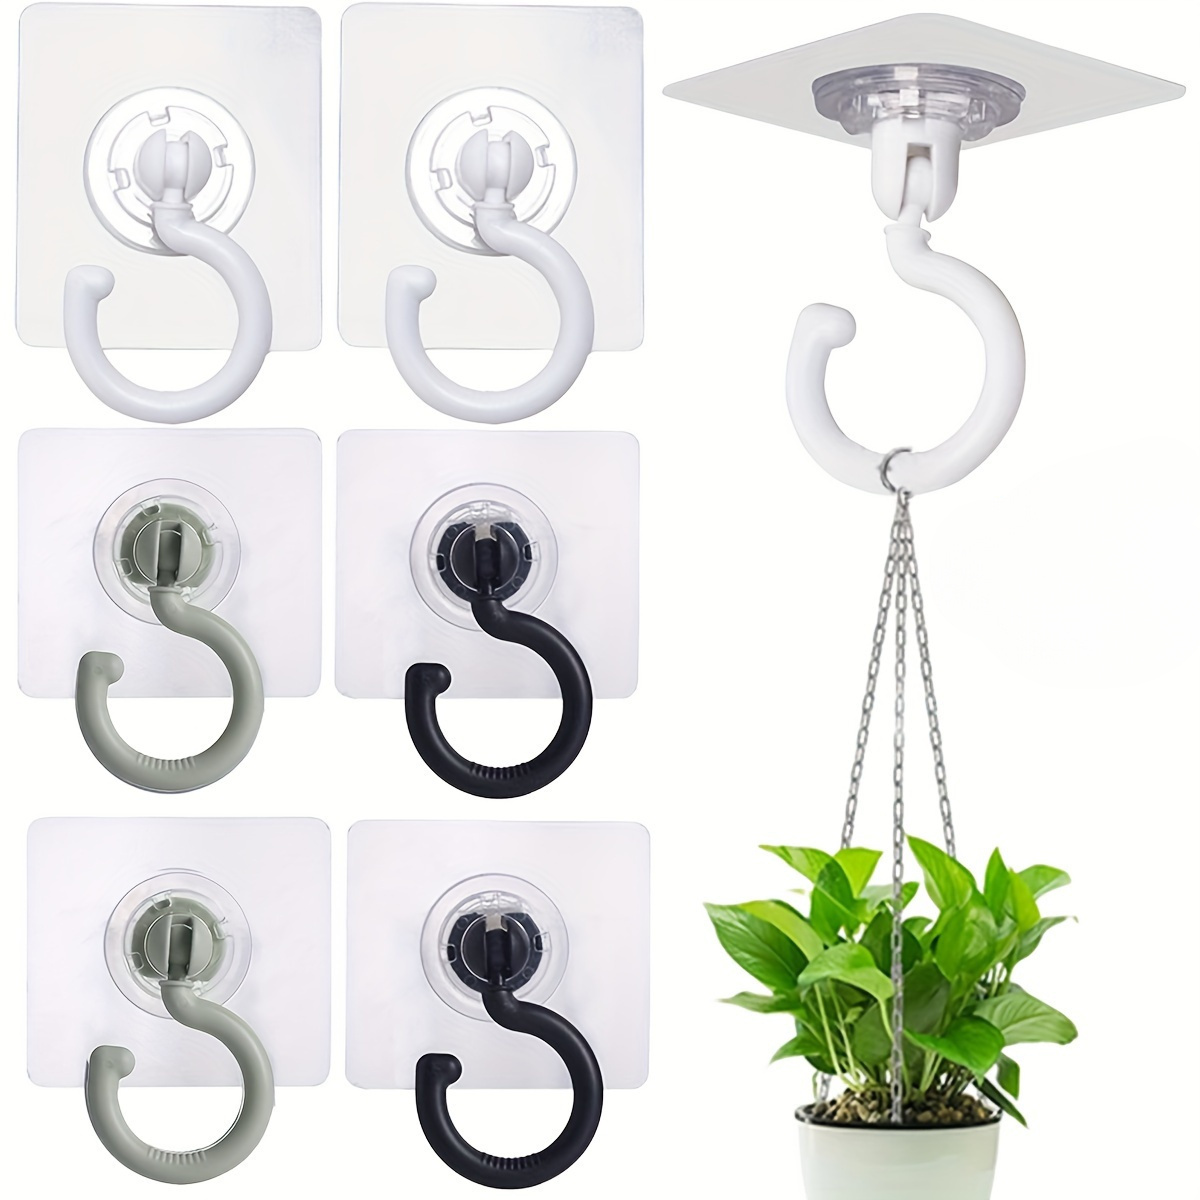 

10pcs Rotatable Adhesive Hooks For Wind Chimes, Plants, And Ceiling Decor - No Drill Ceiling Hanging Hook With Strong Sticky Hanger Utility